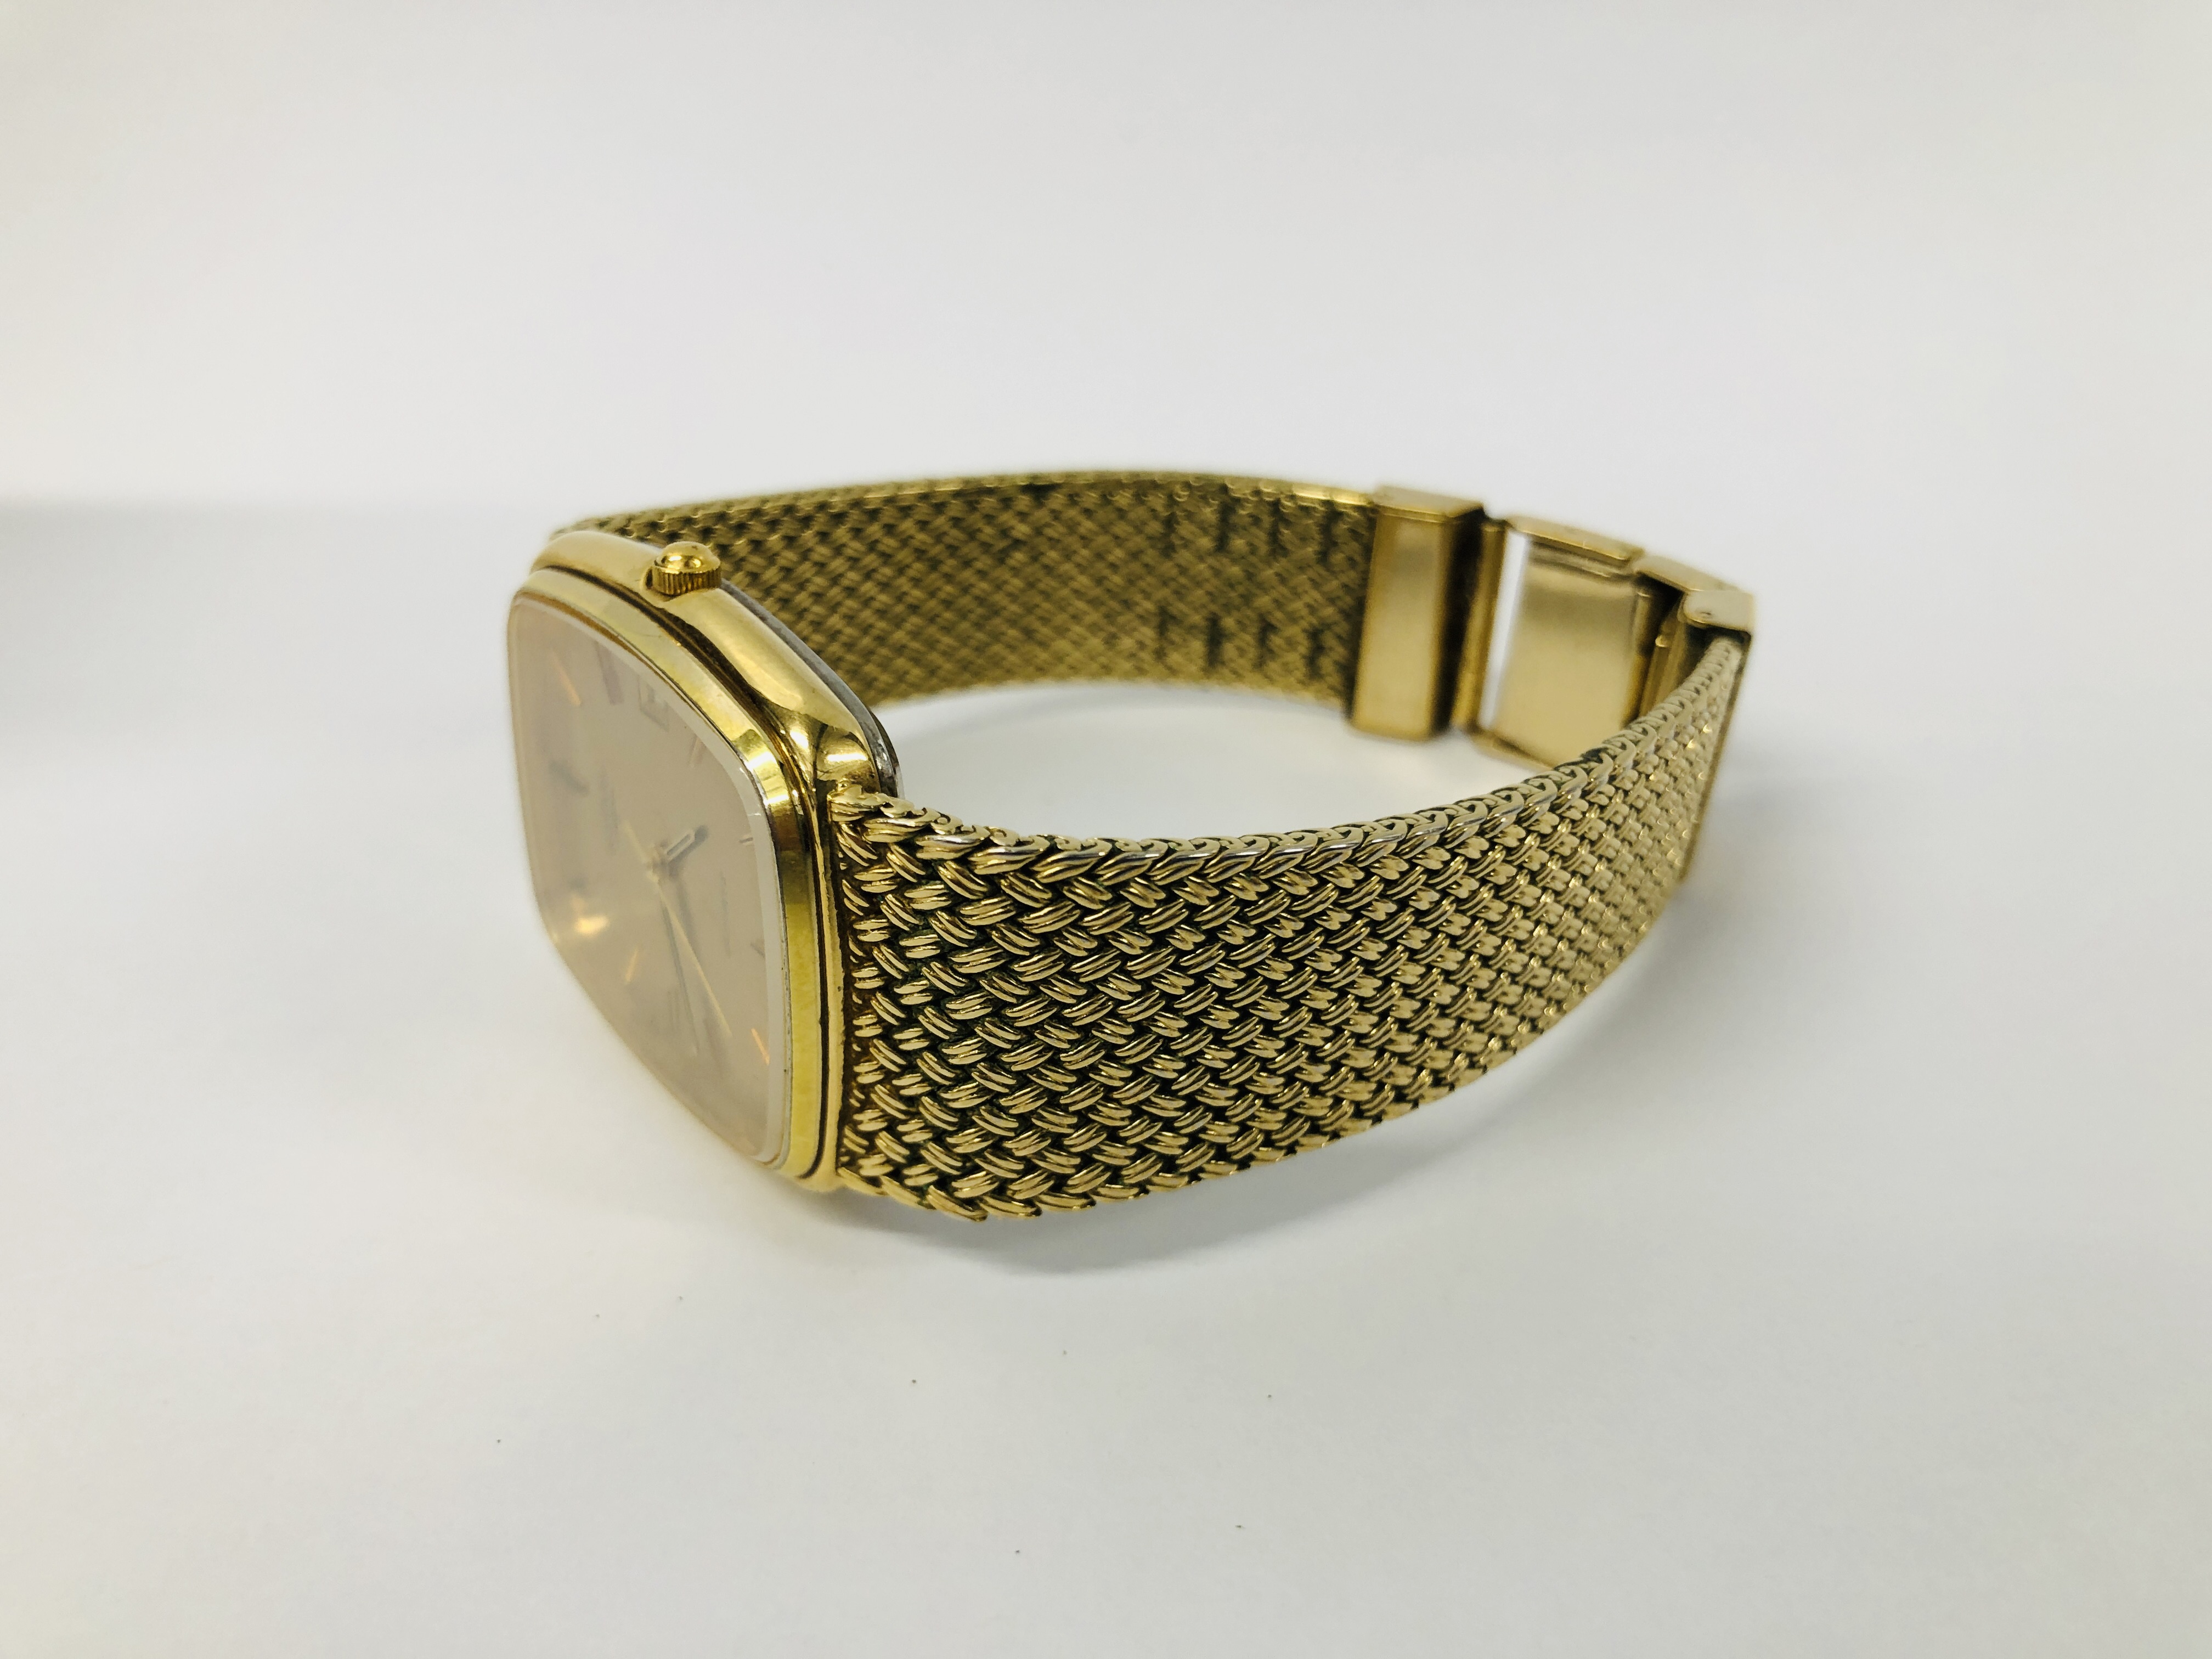 A GENTLEMAN'S ROTARY WRIST WATCH ON GOLD PLATED BRAIDED BRACELET, QUARTZ MOVEMENT. - Image 3 of 7